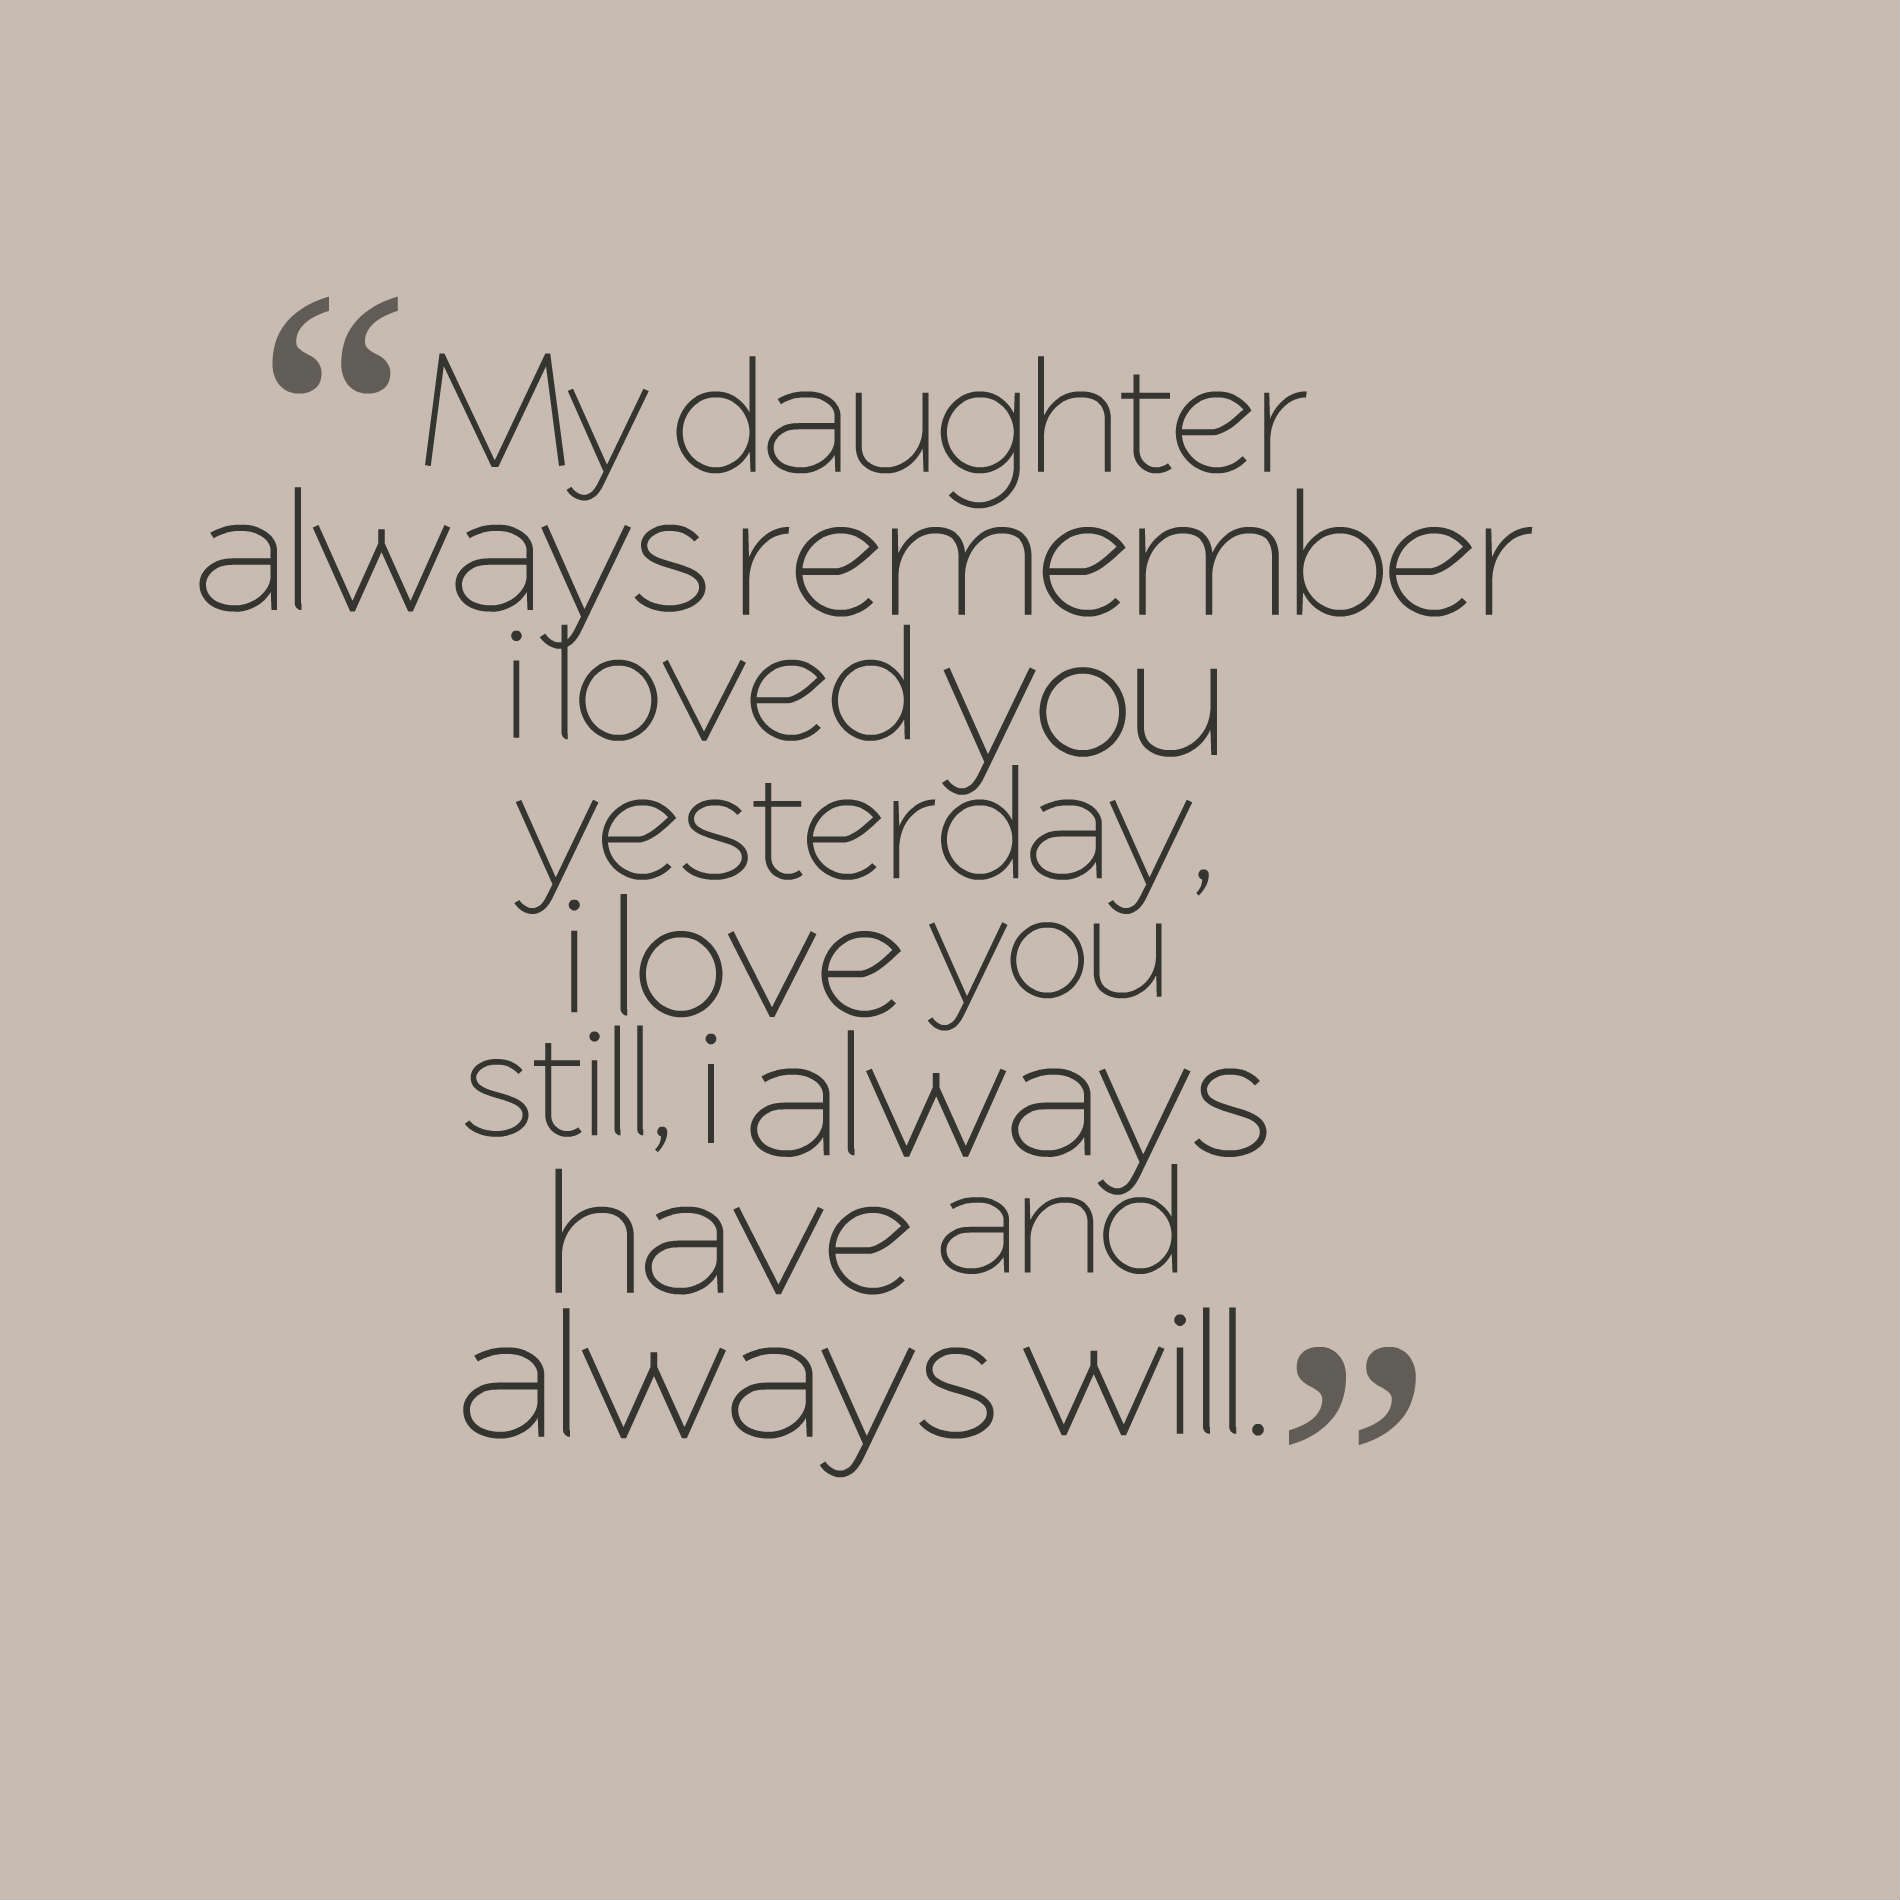 My daughter always remember i loved you yesterday, i love you still, i always have and always will.